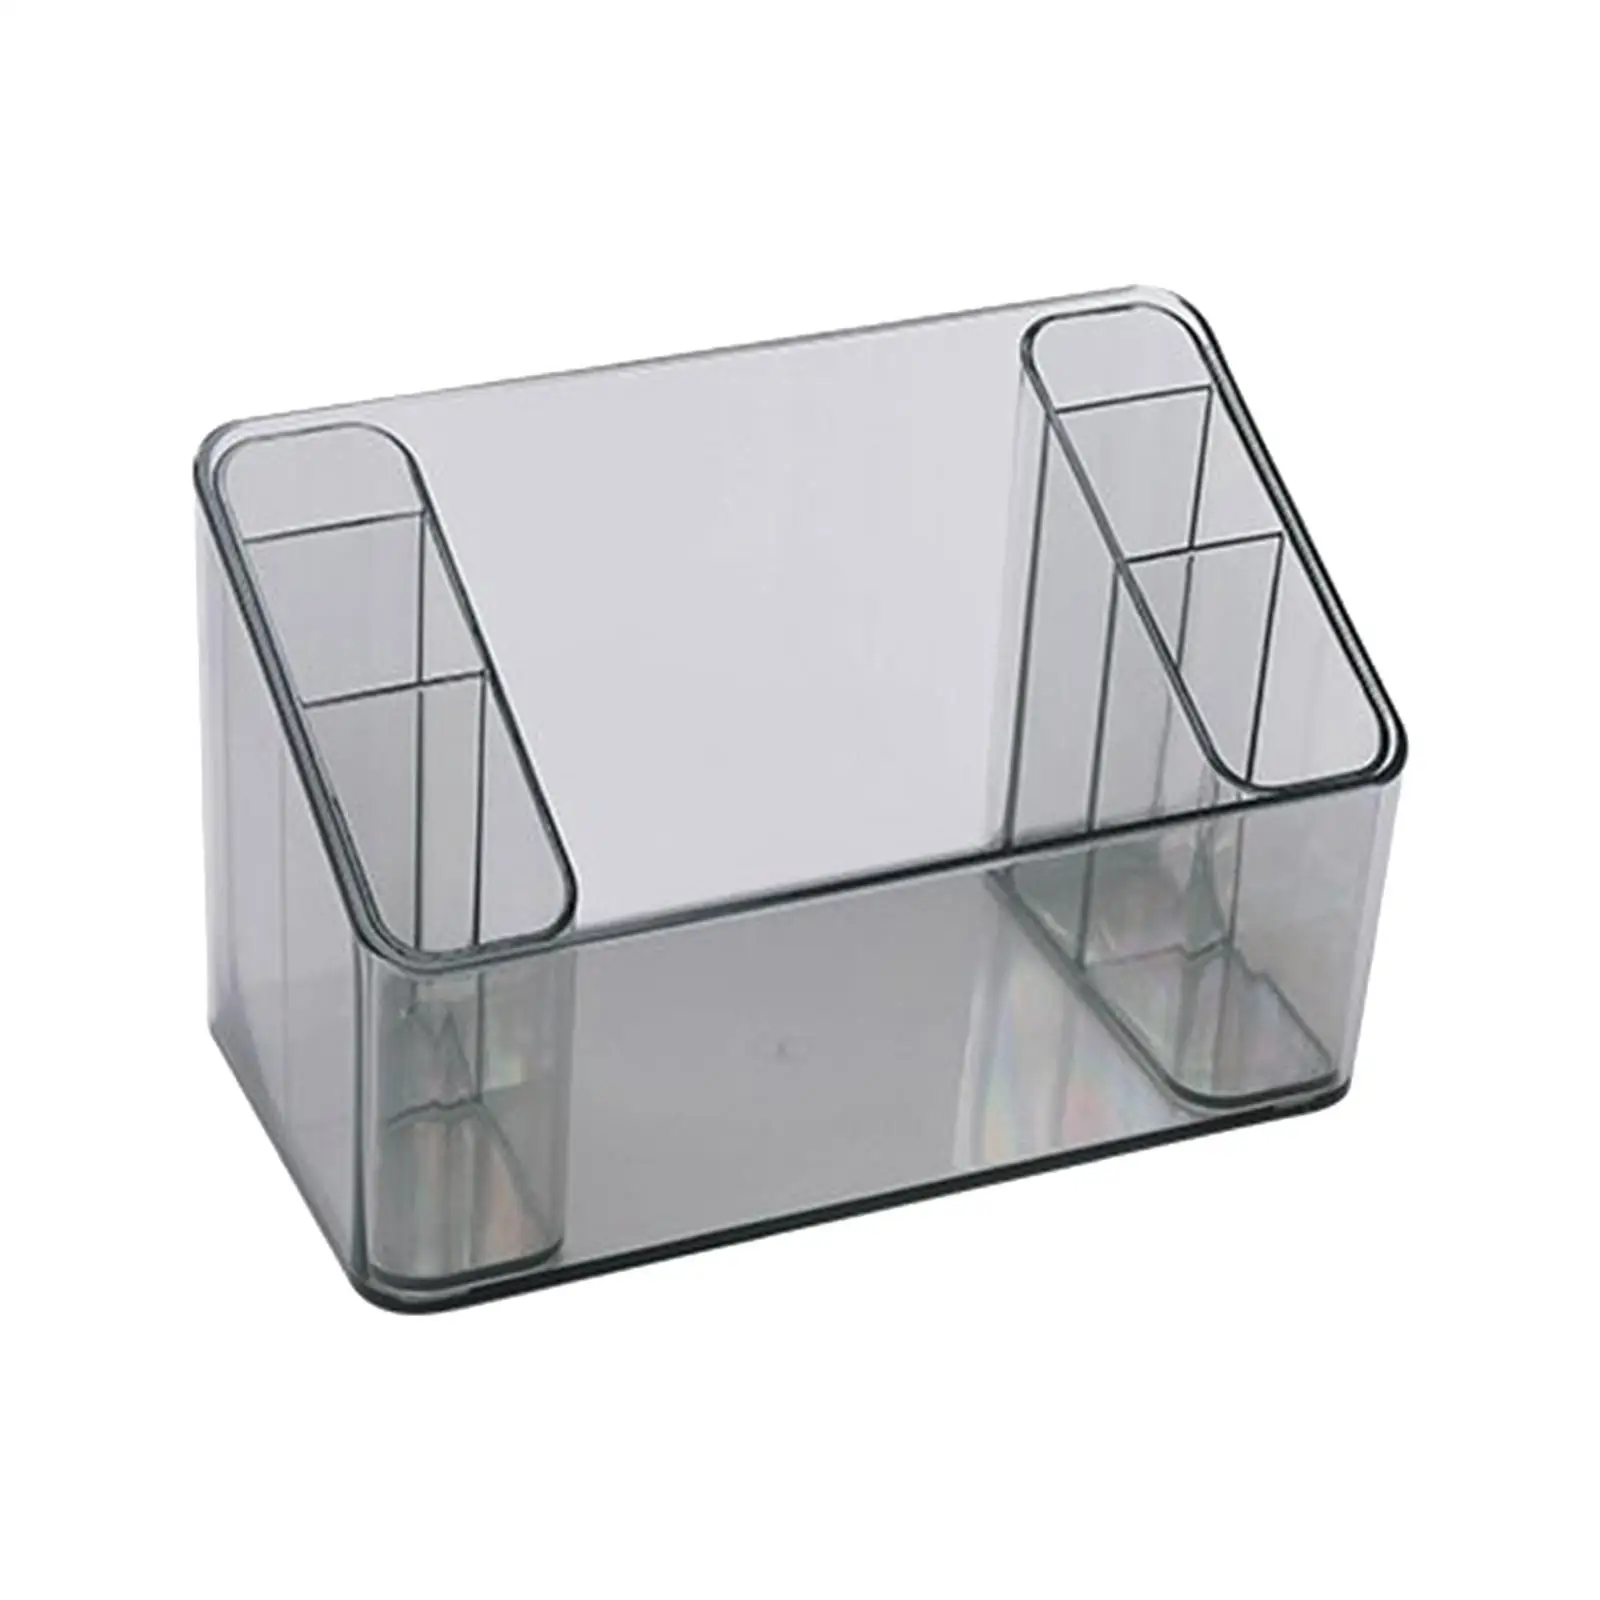 Multifunction Cosmetic Display Case Storage Box Skincare Holder Caddy Basket for Concealers Countertop Bathroom Counter Dresser